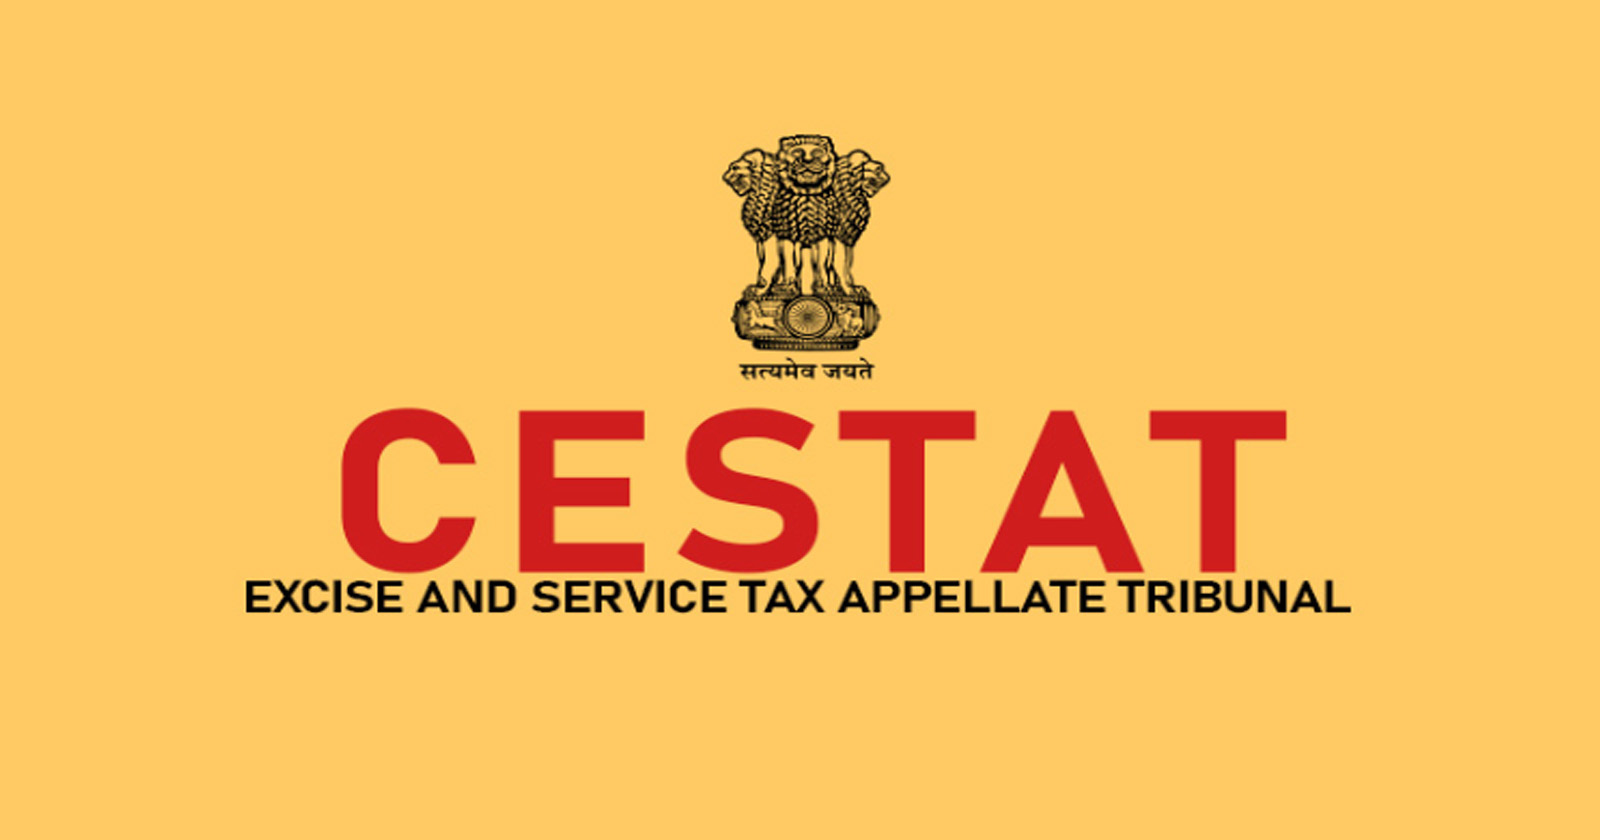 No Appeal - CESTAT Order - Withdrawn on Monetary Grounds - CESTAT - TAXSCAN